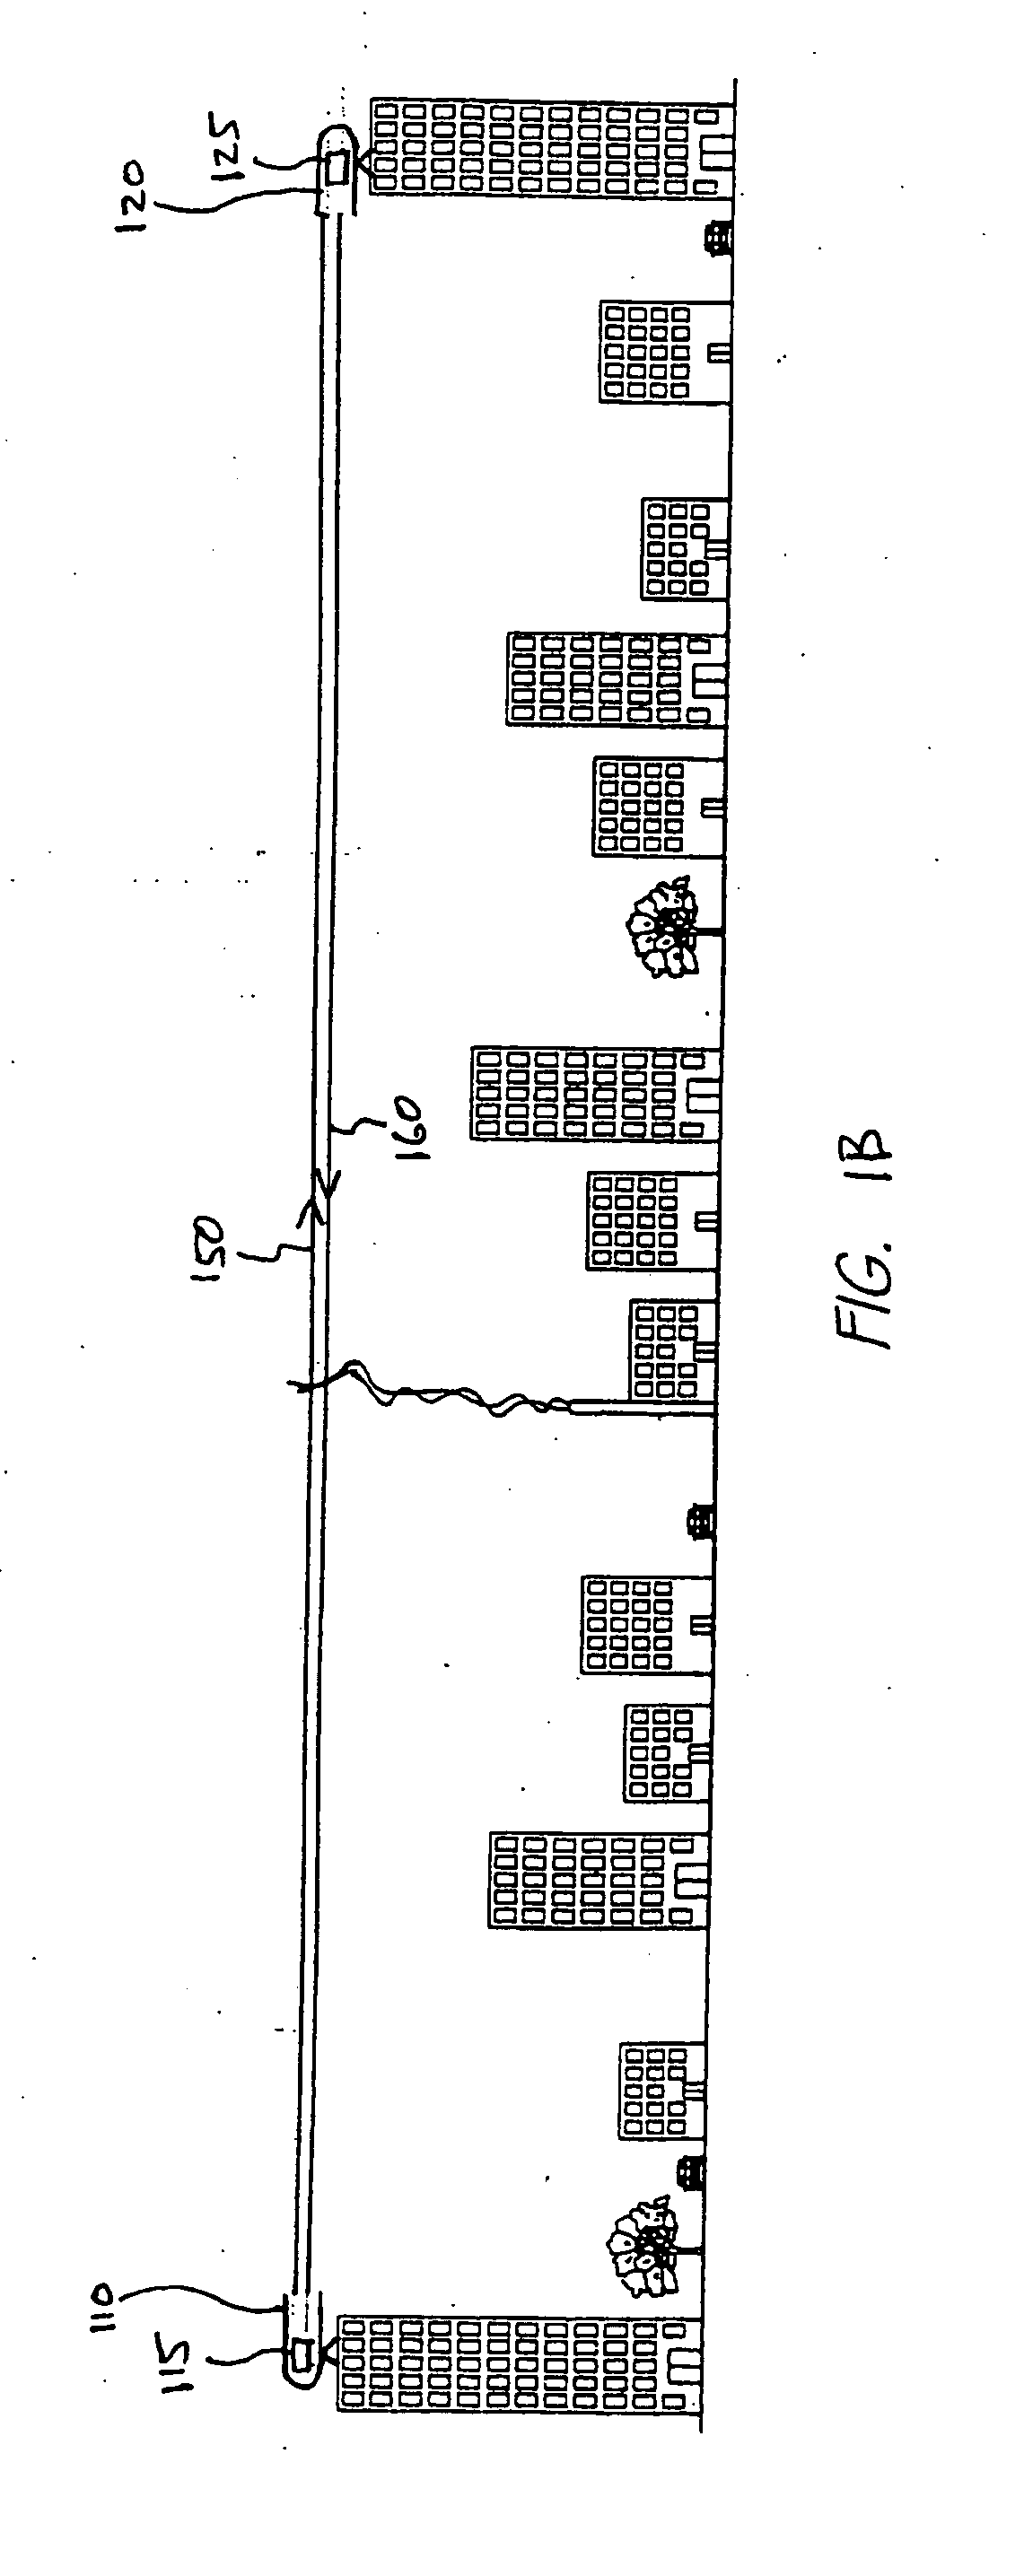 Data port alignment of free space optical communications terminal with adaptive optics